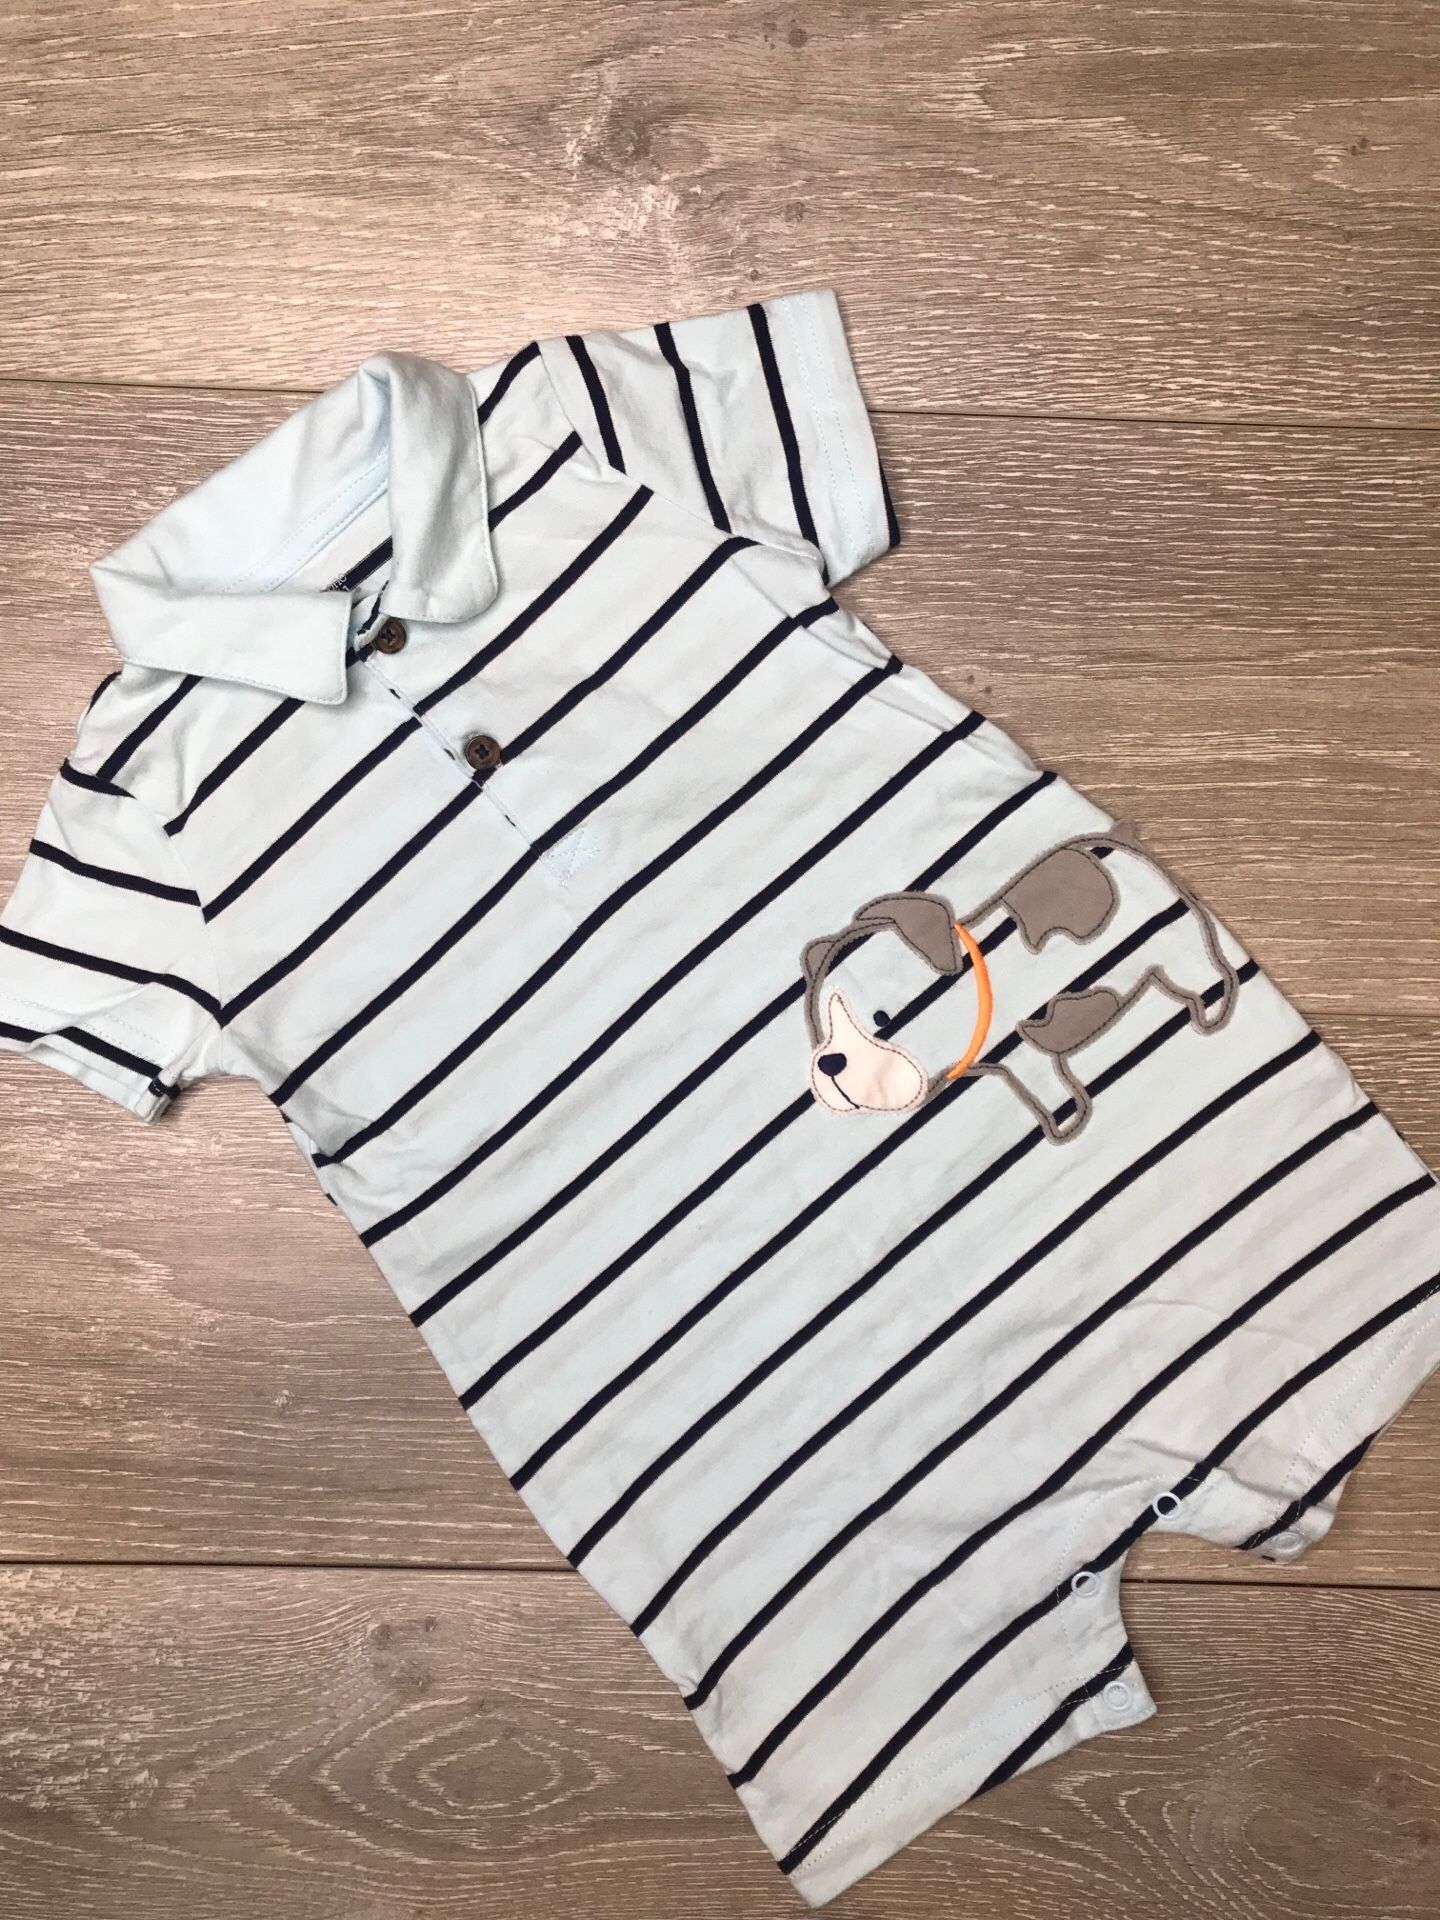 Baby Boy Clothing By Carter’s 18 Months $2.50